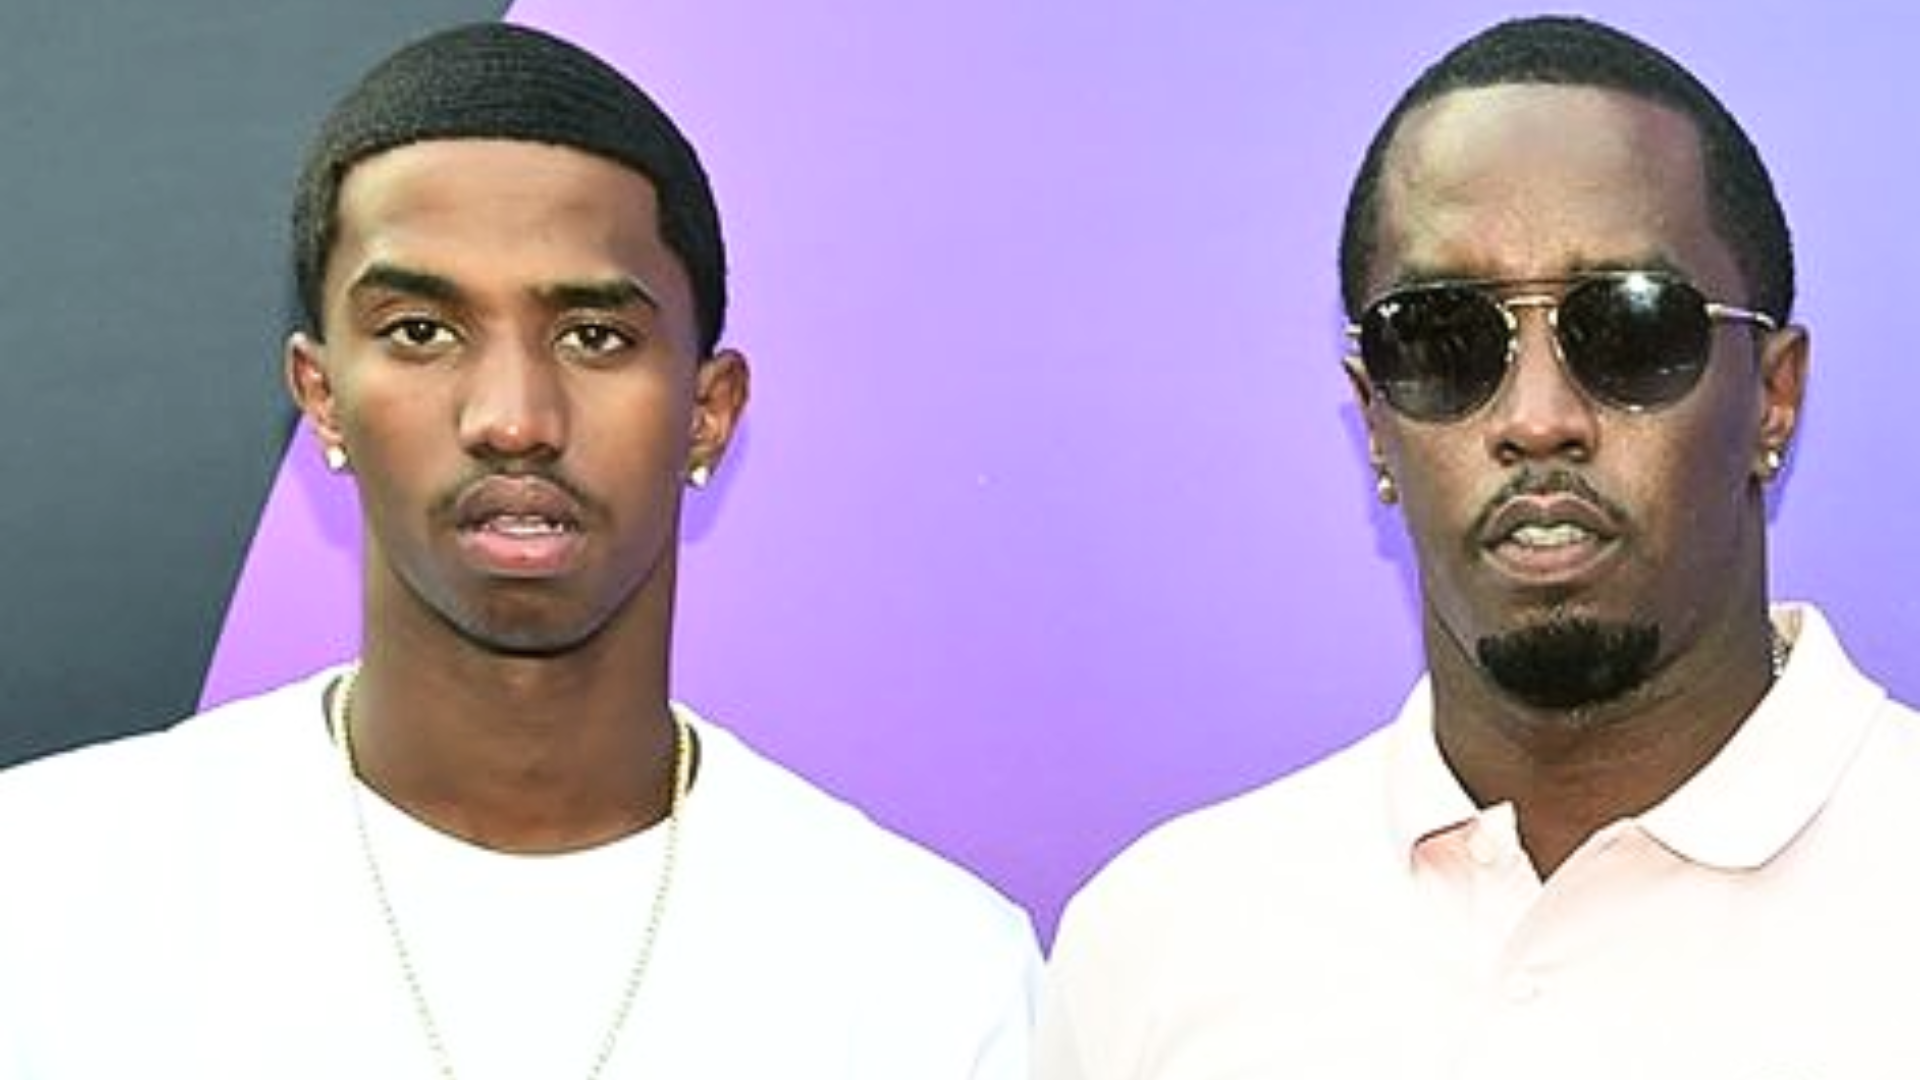 Who Is P Diddy’s Son Christian Combs? Rapper’s Son Gets Accused Of Se*ual Assault in New Lawsuit